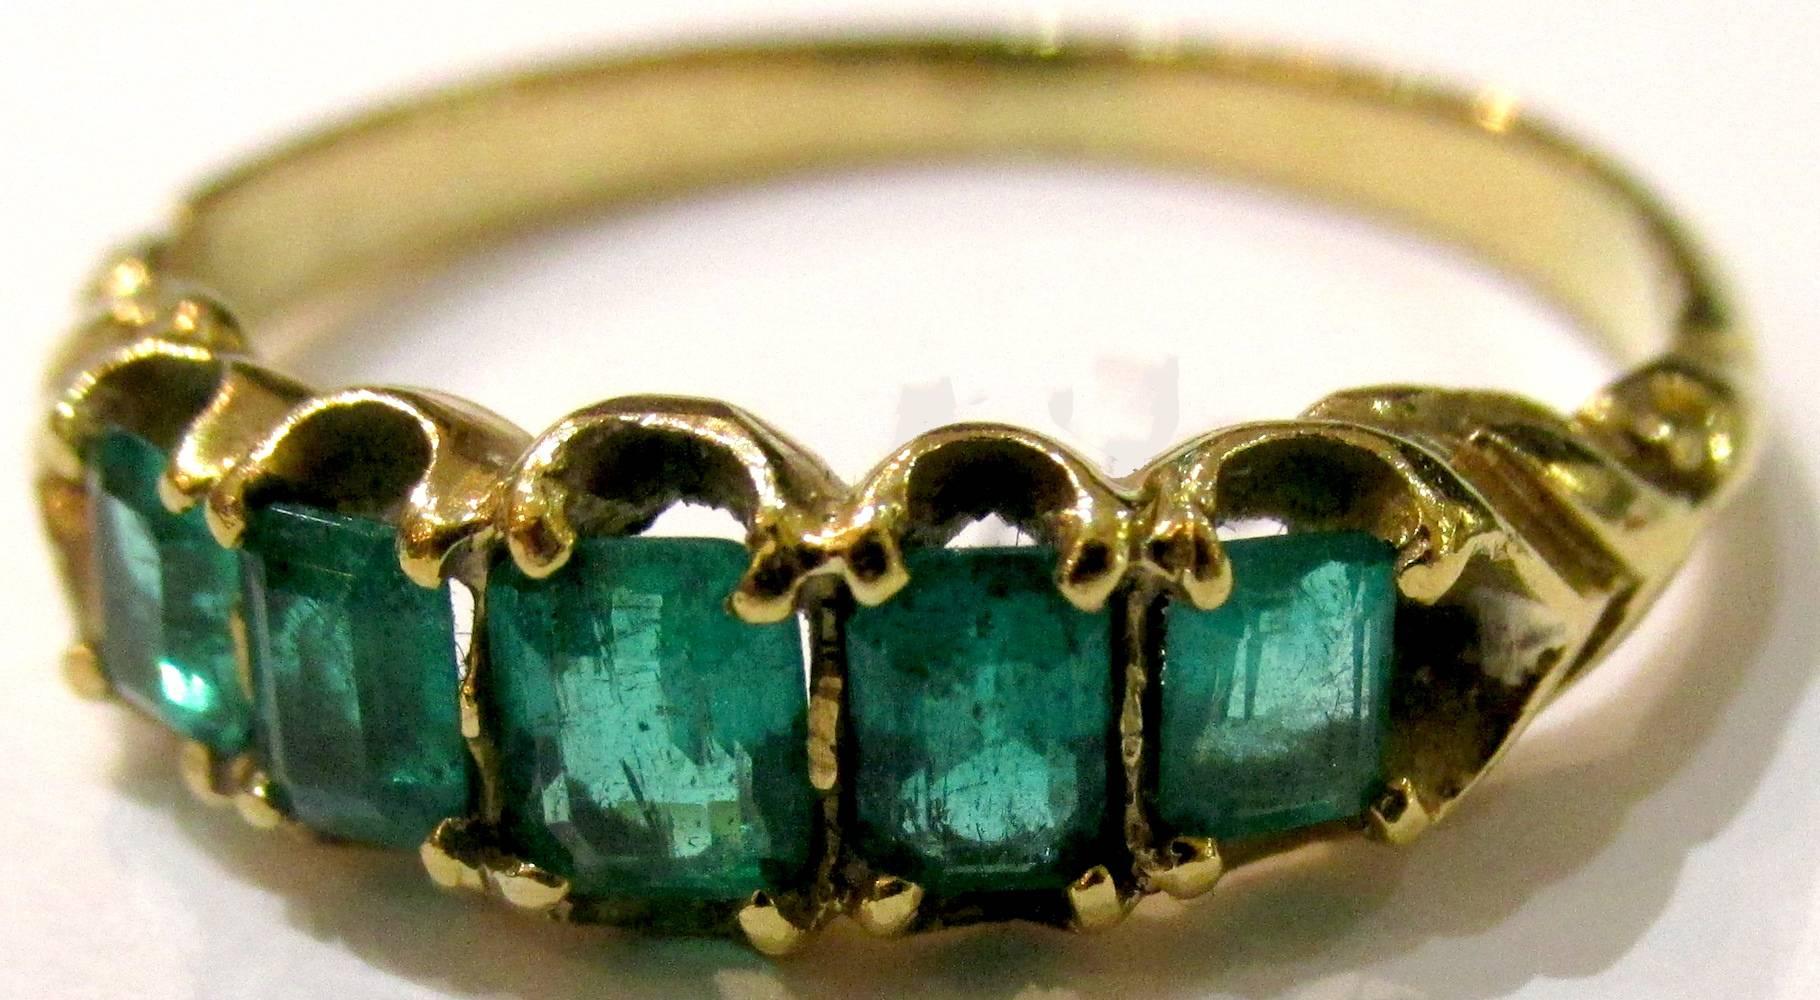 Lovely Victorian five stone emerald ring set in 18K yellow gold can be worn alone or stacked with other rings. The ring is a size 6 1/2.